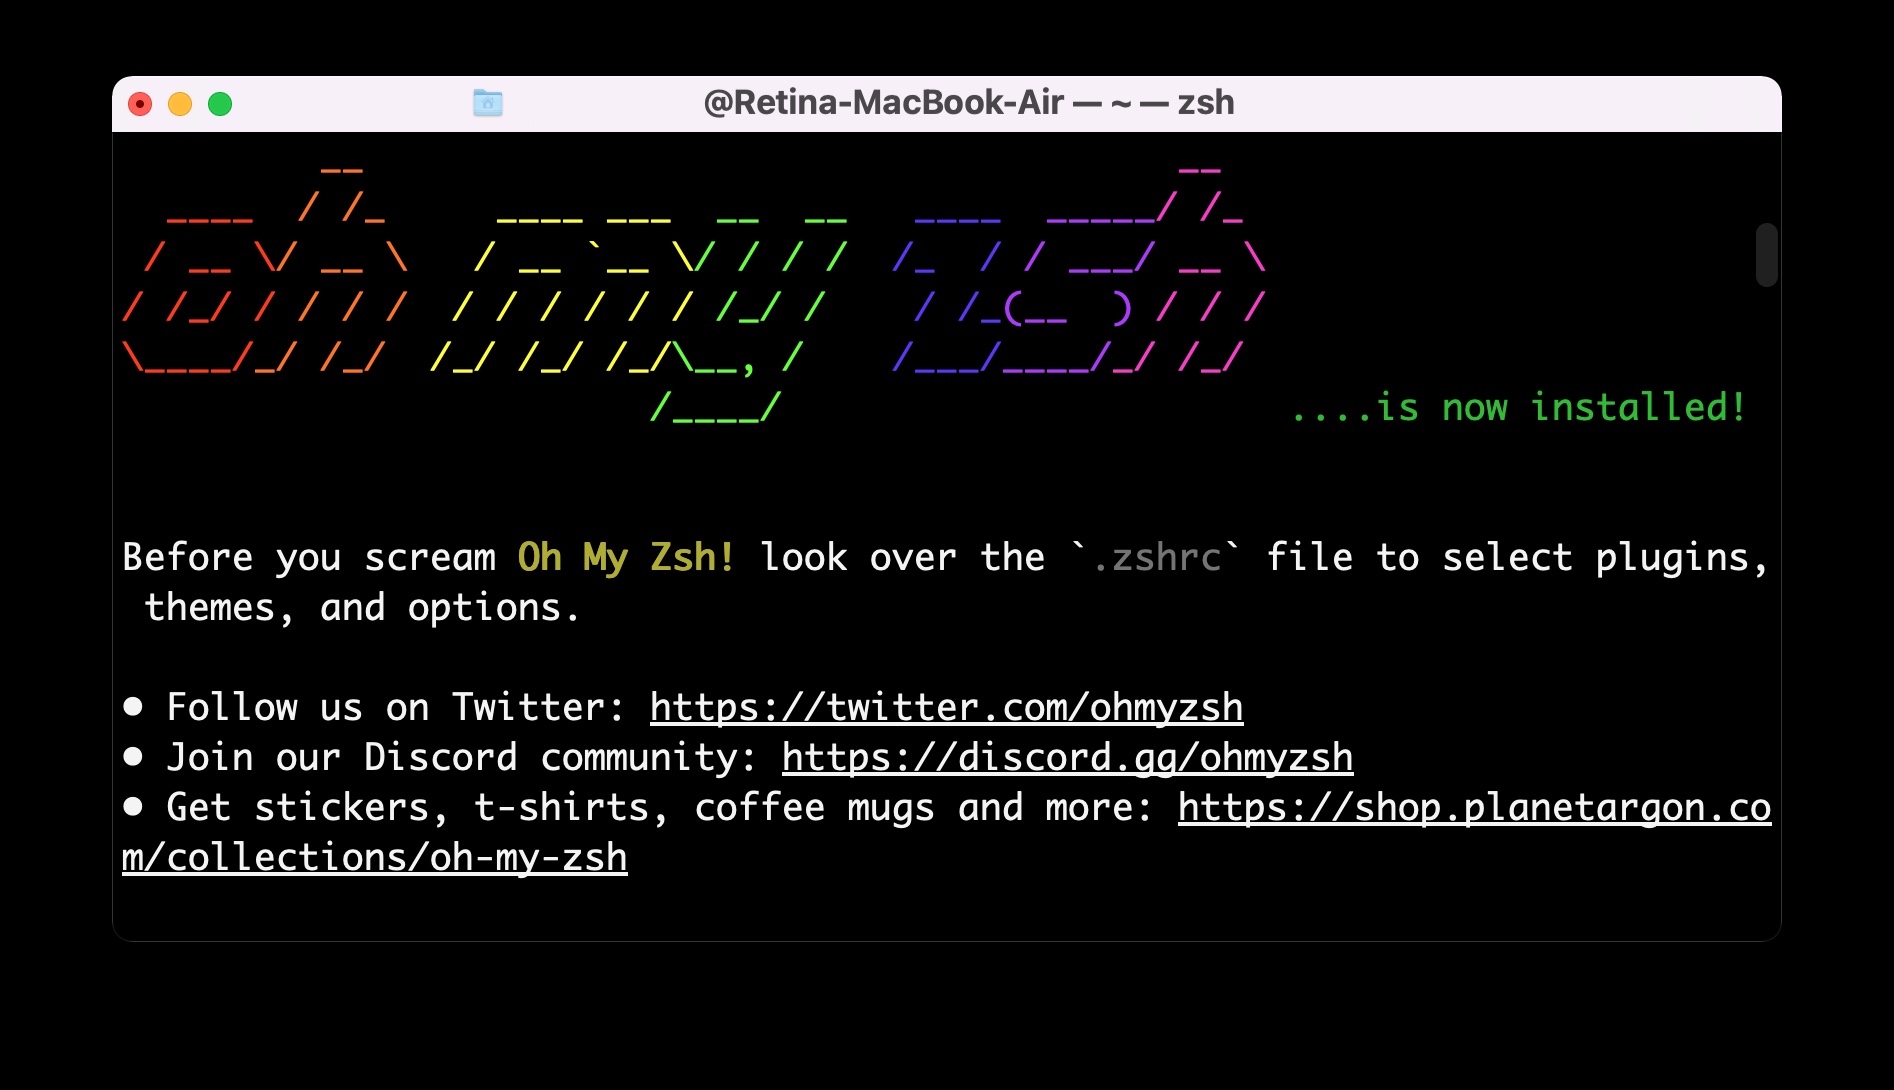 How to Install Oh My Zsh on Mac